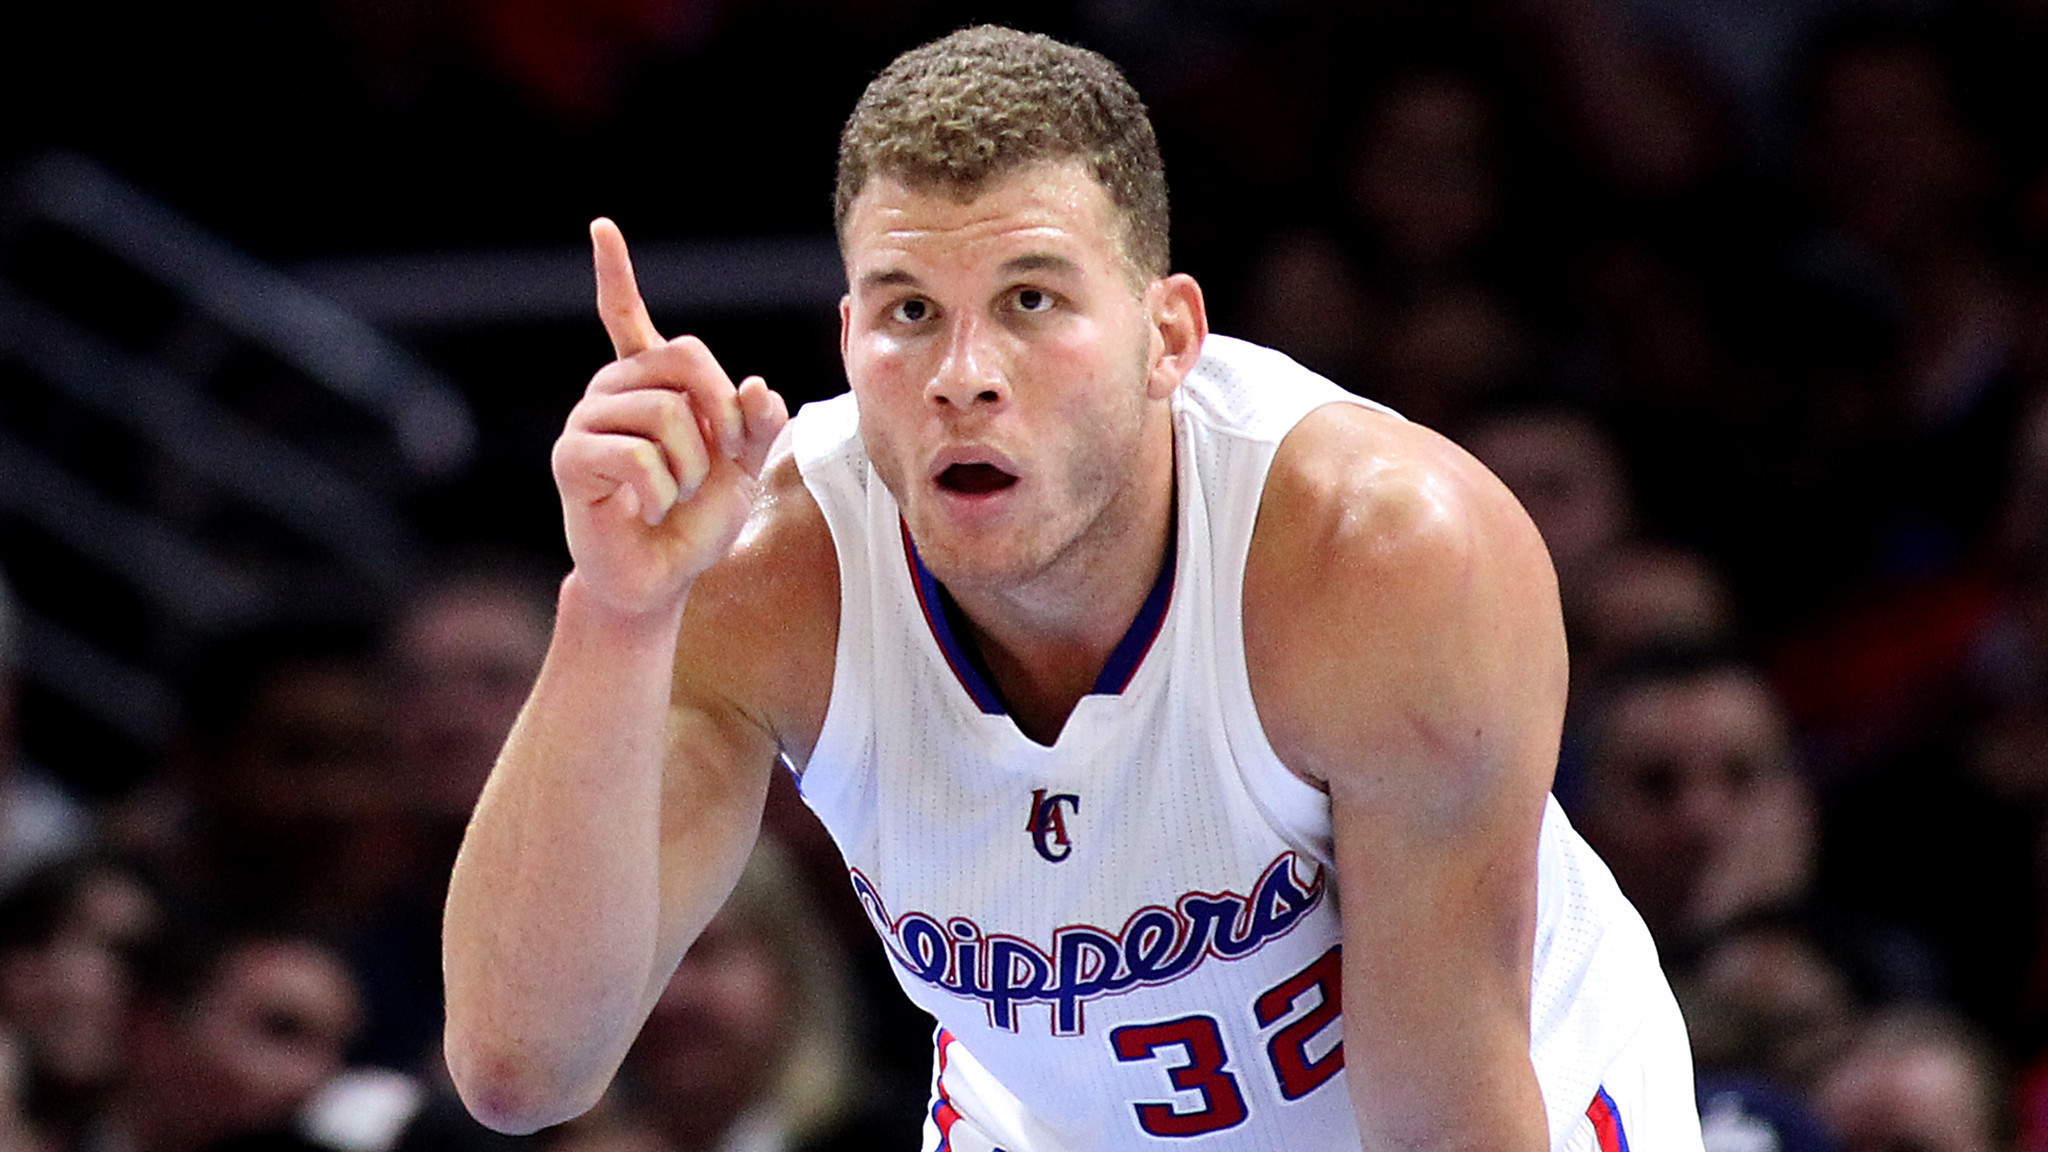 Clippers All-Star Blake Griffin has staph infection and needs surgery - LA Times